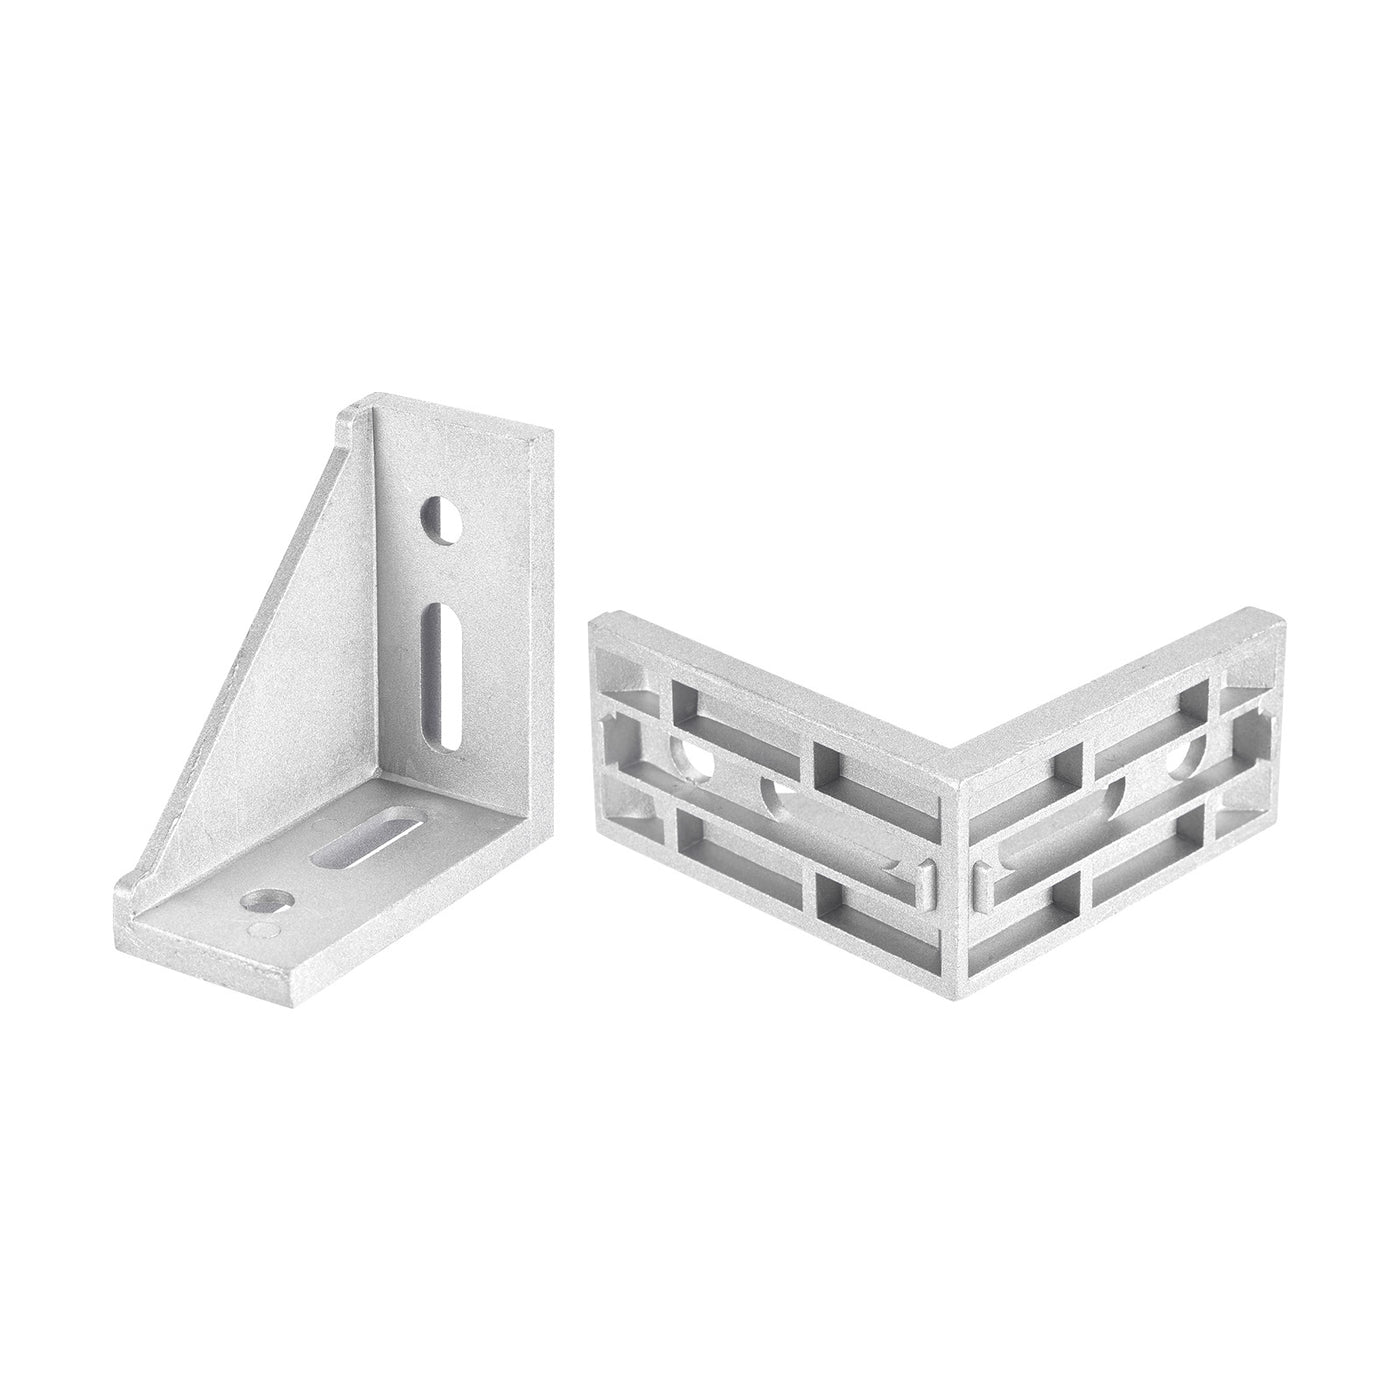 uxcell Uxcell 2Pcs Inside Corner Bracket Gusset, 88x88x42mm 4590 Angle Connectors for 4545/5050 Series Aluminum Extrusion Profile Silver